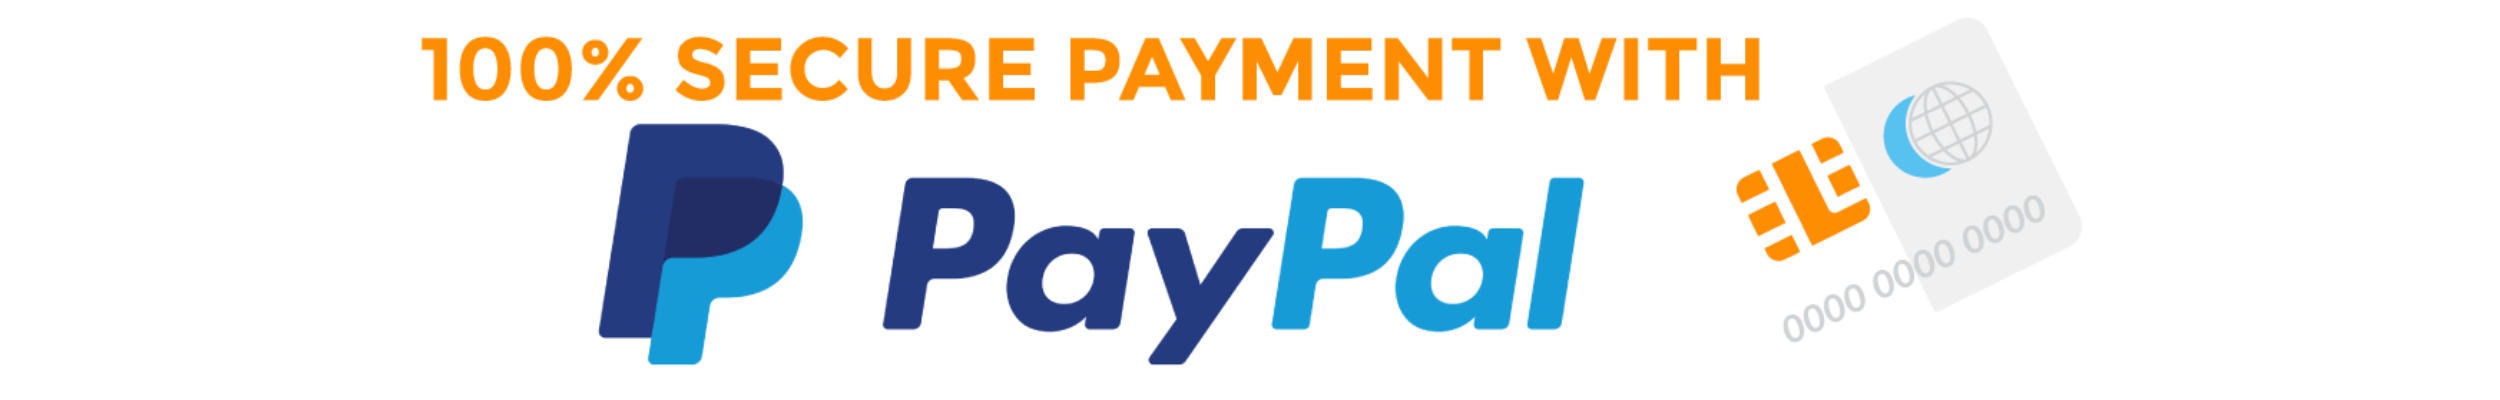 Paypal website banner